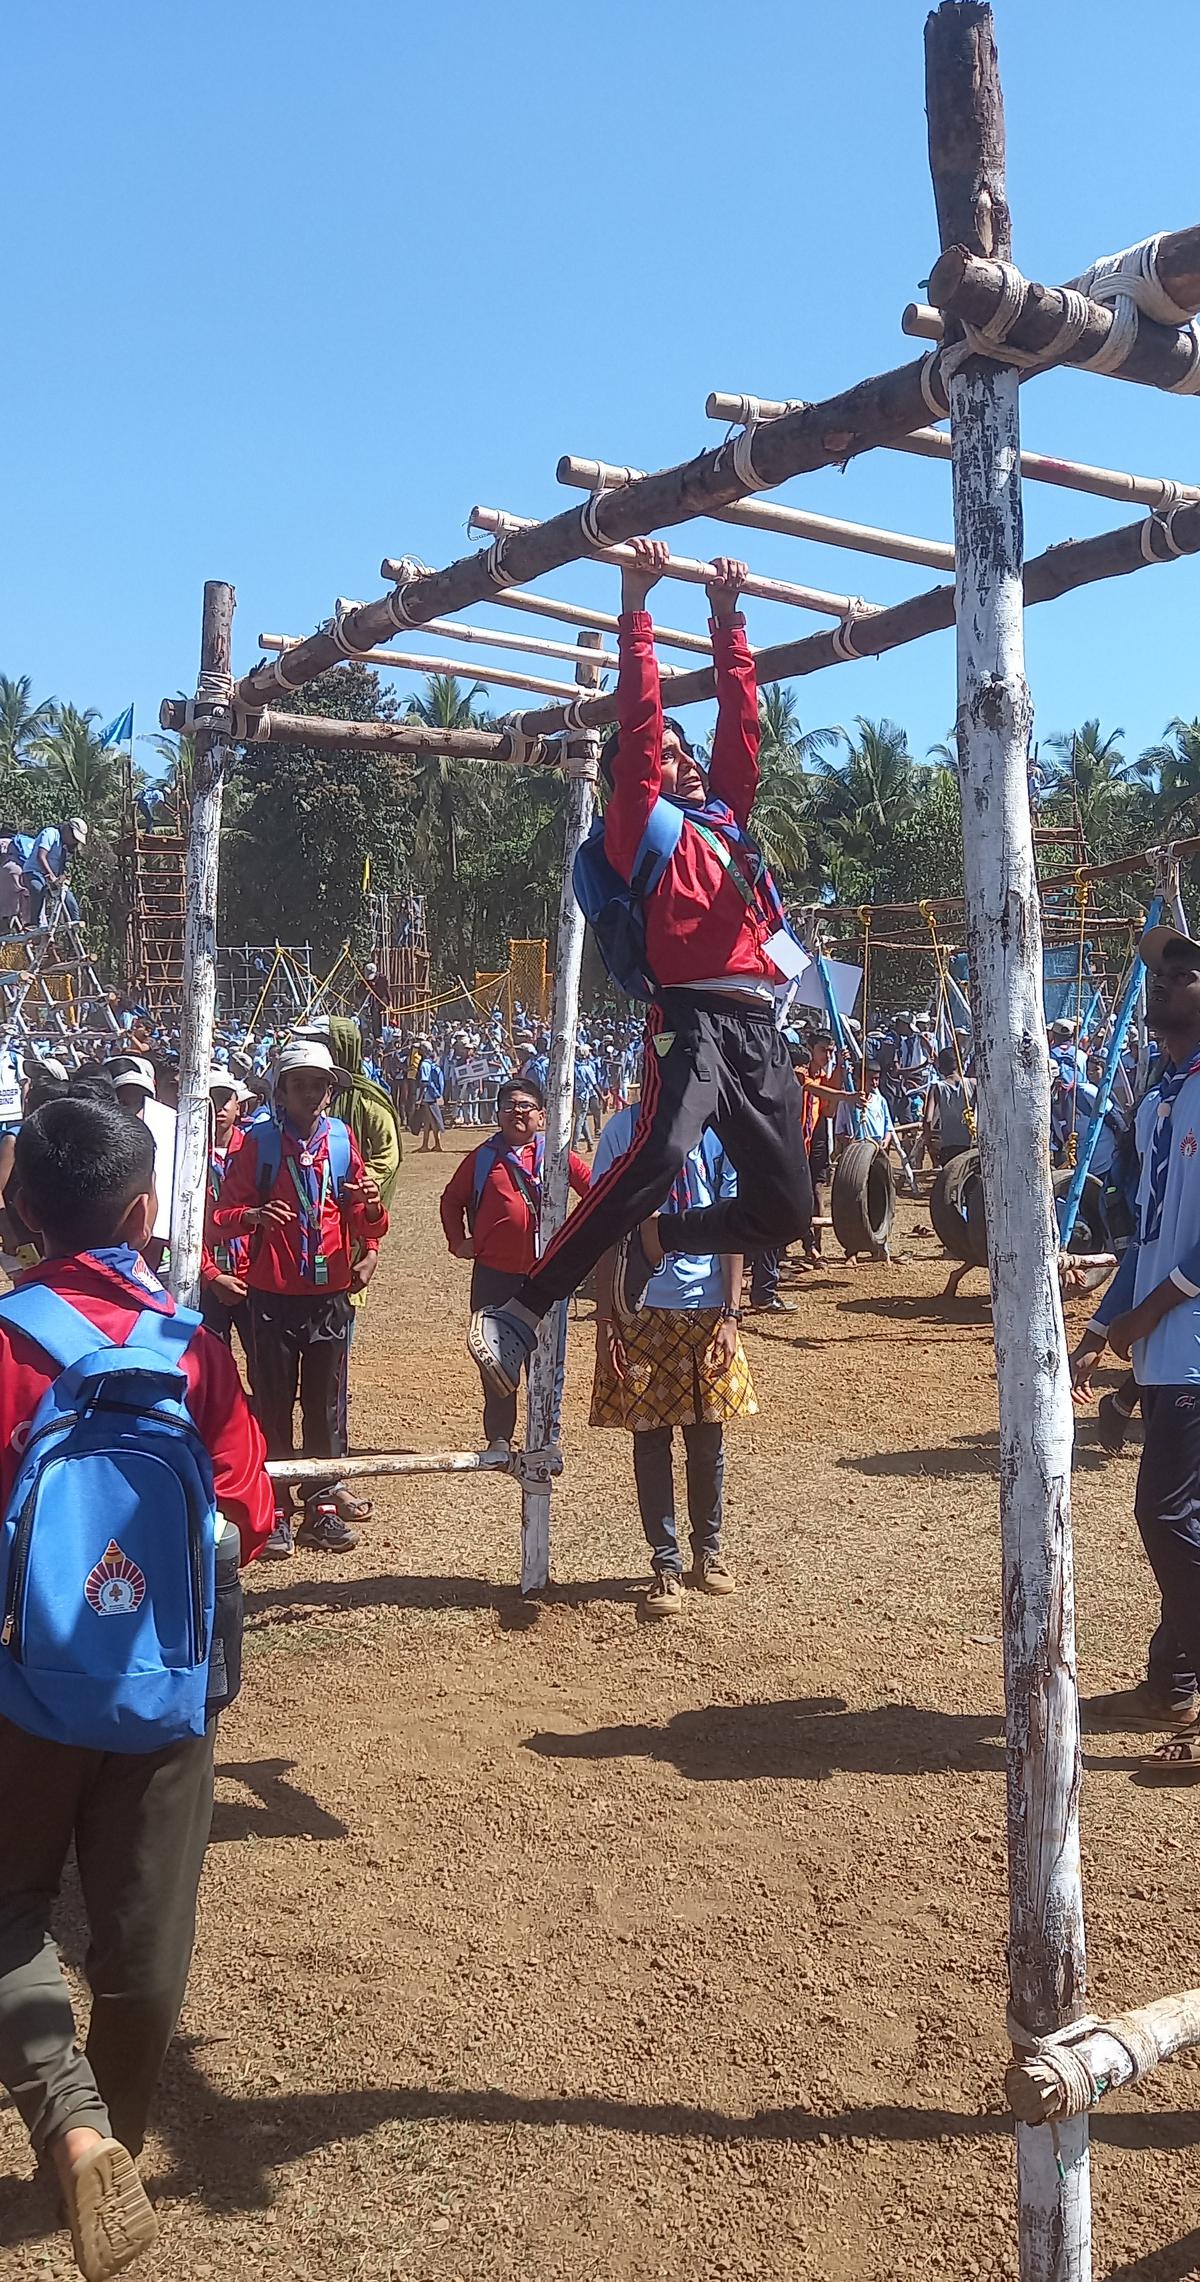 A good number of Scouts, Guides, Rovers and Rangers from all over the country took part in a variety of adventure activities at the Challenge Valley held on Thursday at Aruba's Group of Institutions campus in Moodbidri as part of the International Cultural Jamboree. did. 